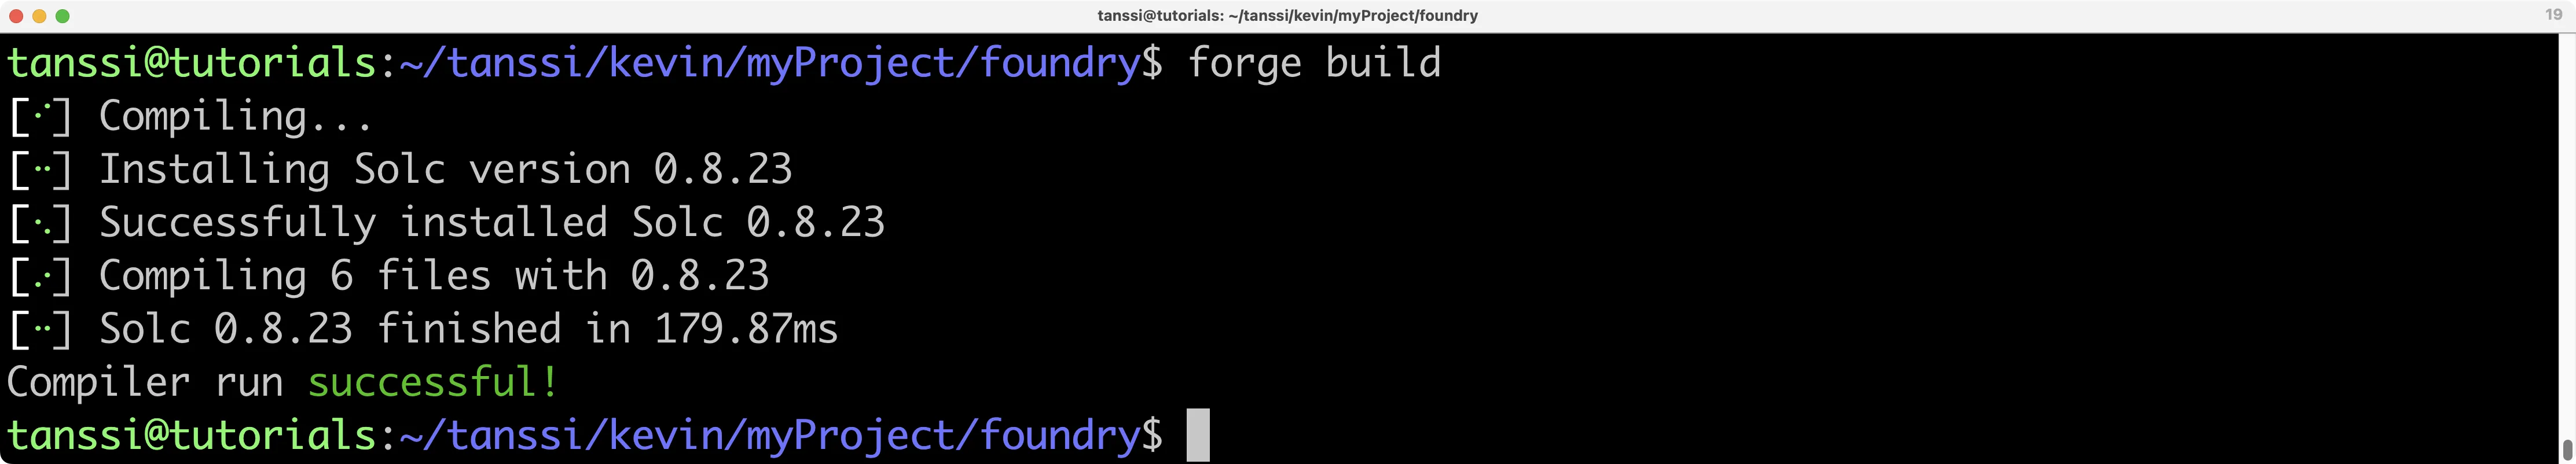 Foundry Contract Compile